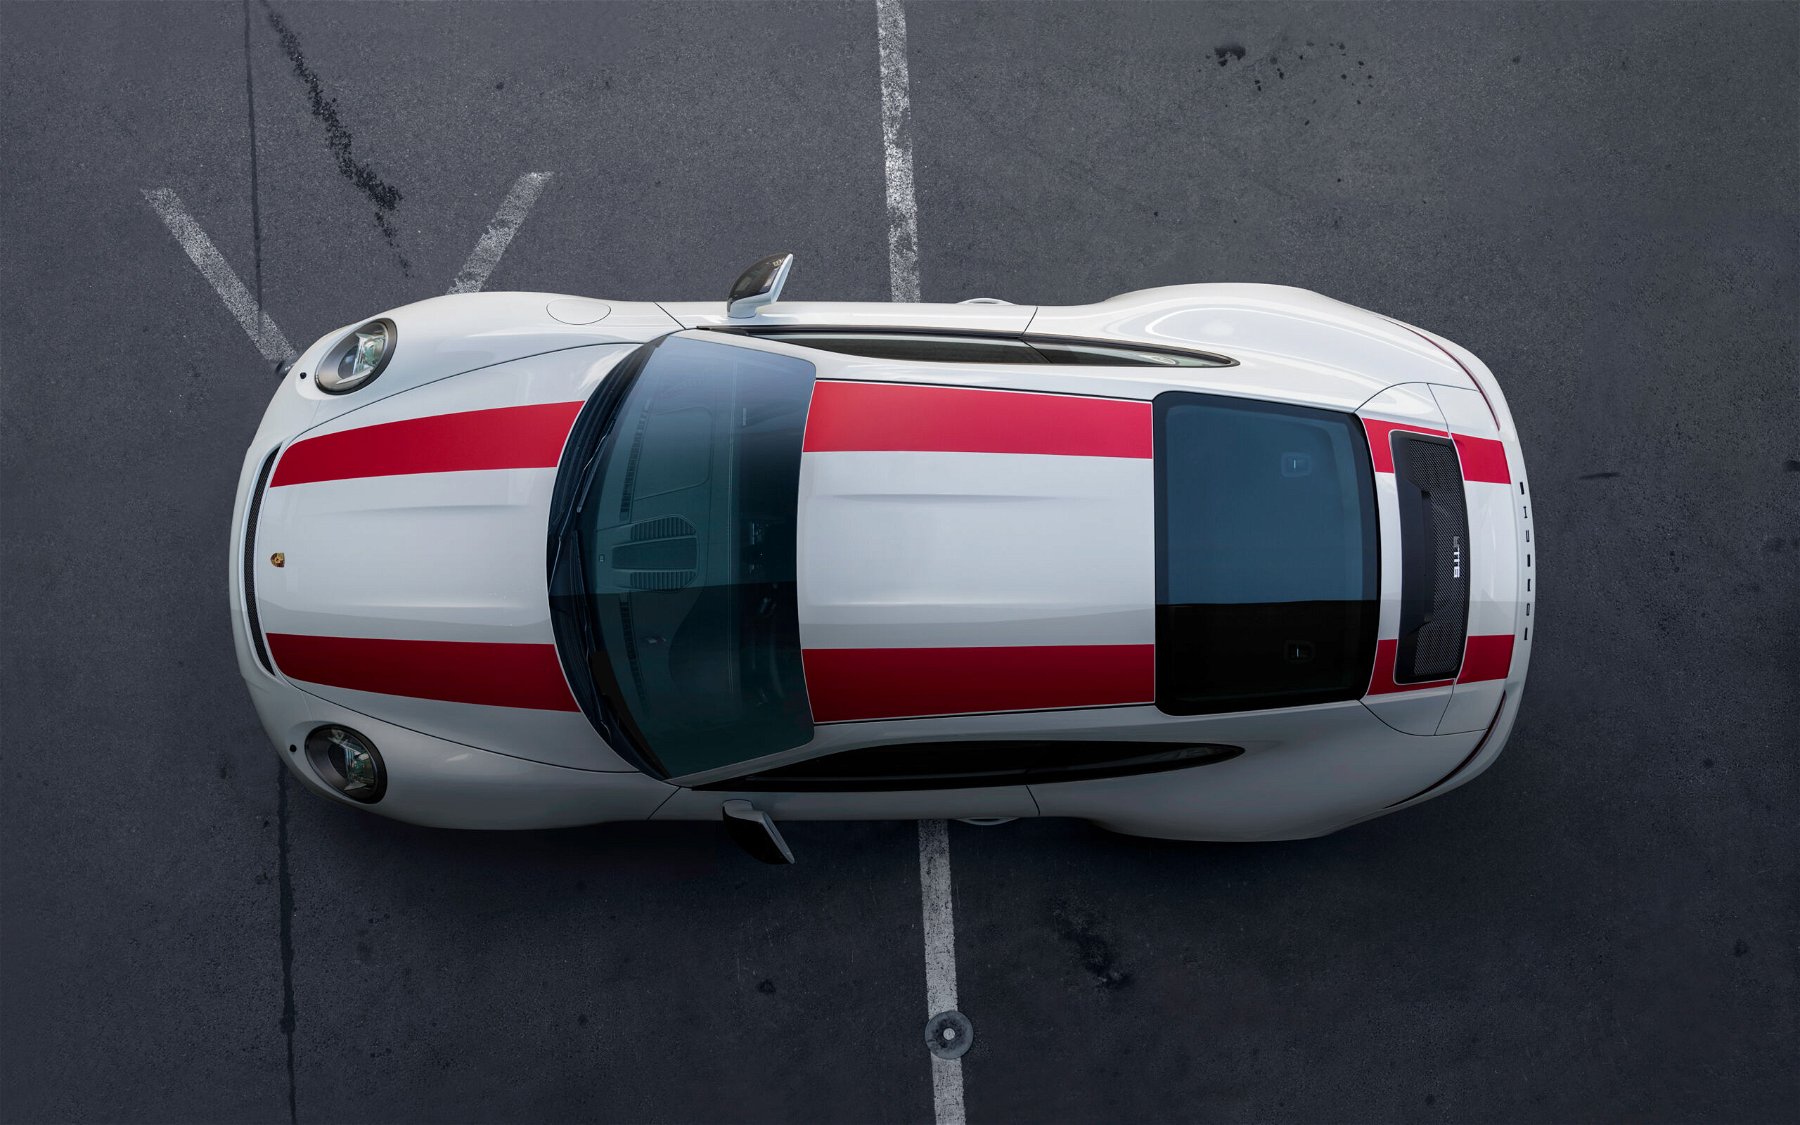 Toys for Boys collection Porsche 911 R from the top